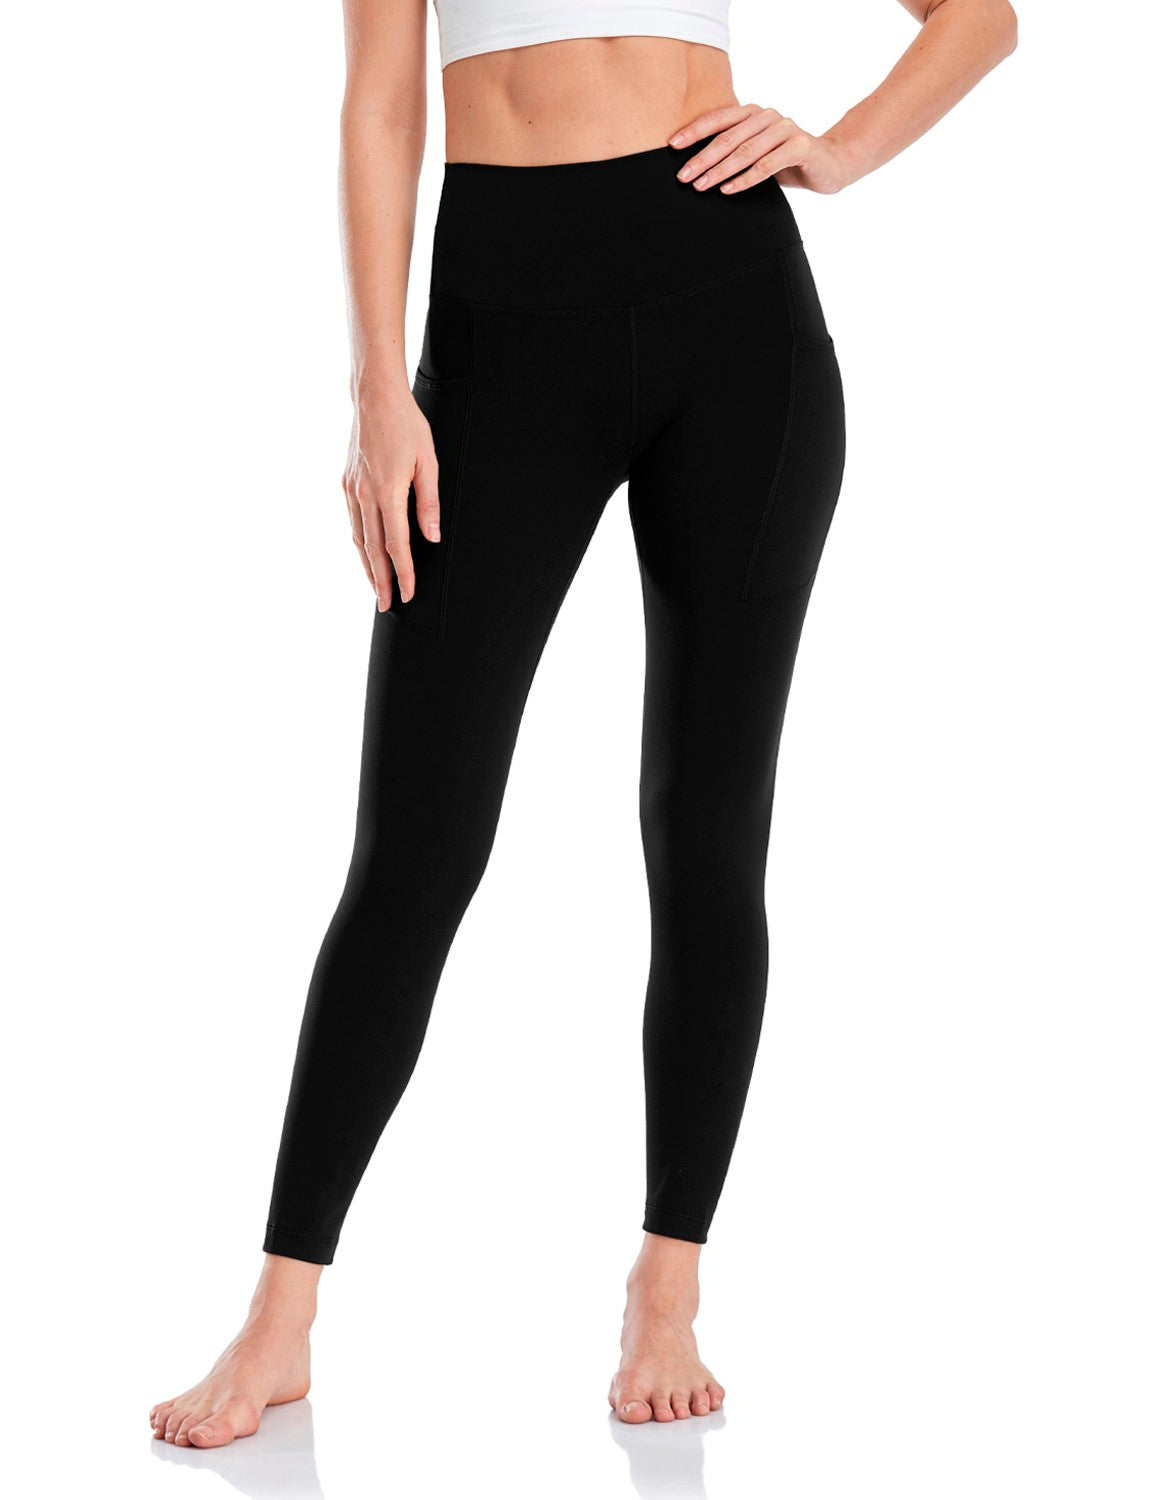  Customer reviews: HeyNuts Essential 7/8 Leggings High Waisted  Yoga Pants for Women, Soft Workout Pants Compression Leggings with Inner  Pockets Black_25'' S(4/6)